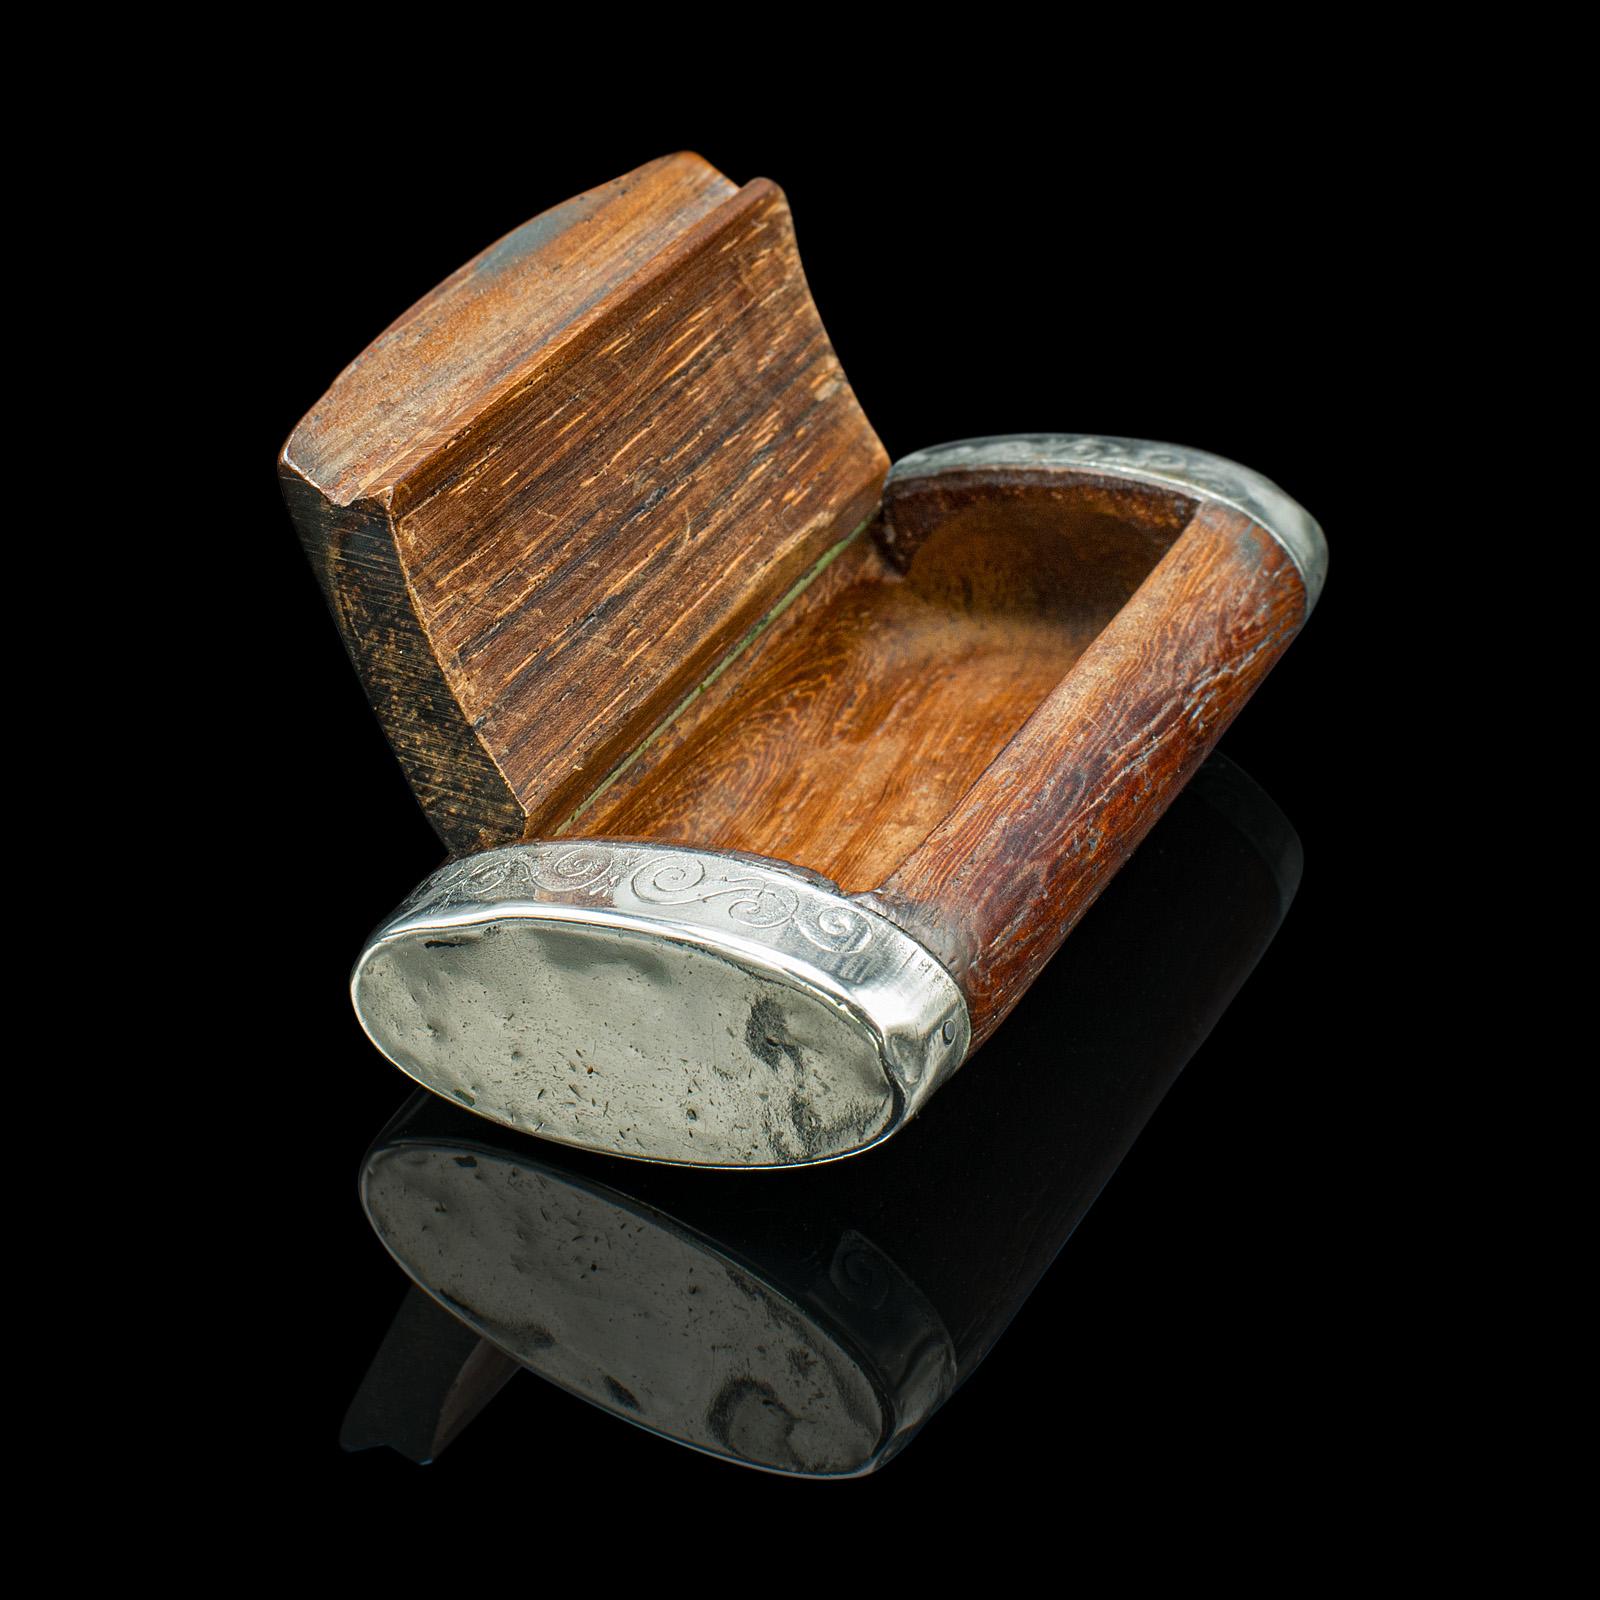 This is a small antique pill box. A French, walnut and silver plated lidded pocket case, dating to the late Victorian period, circa 1900.

Charmingly petite wooden box, ideal for the coat pocket
Displays a desirable aged patina and in good